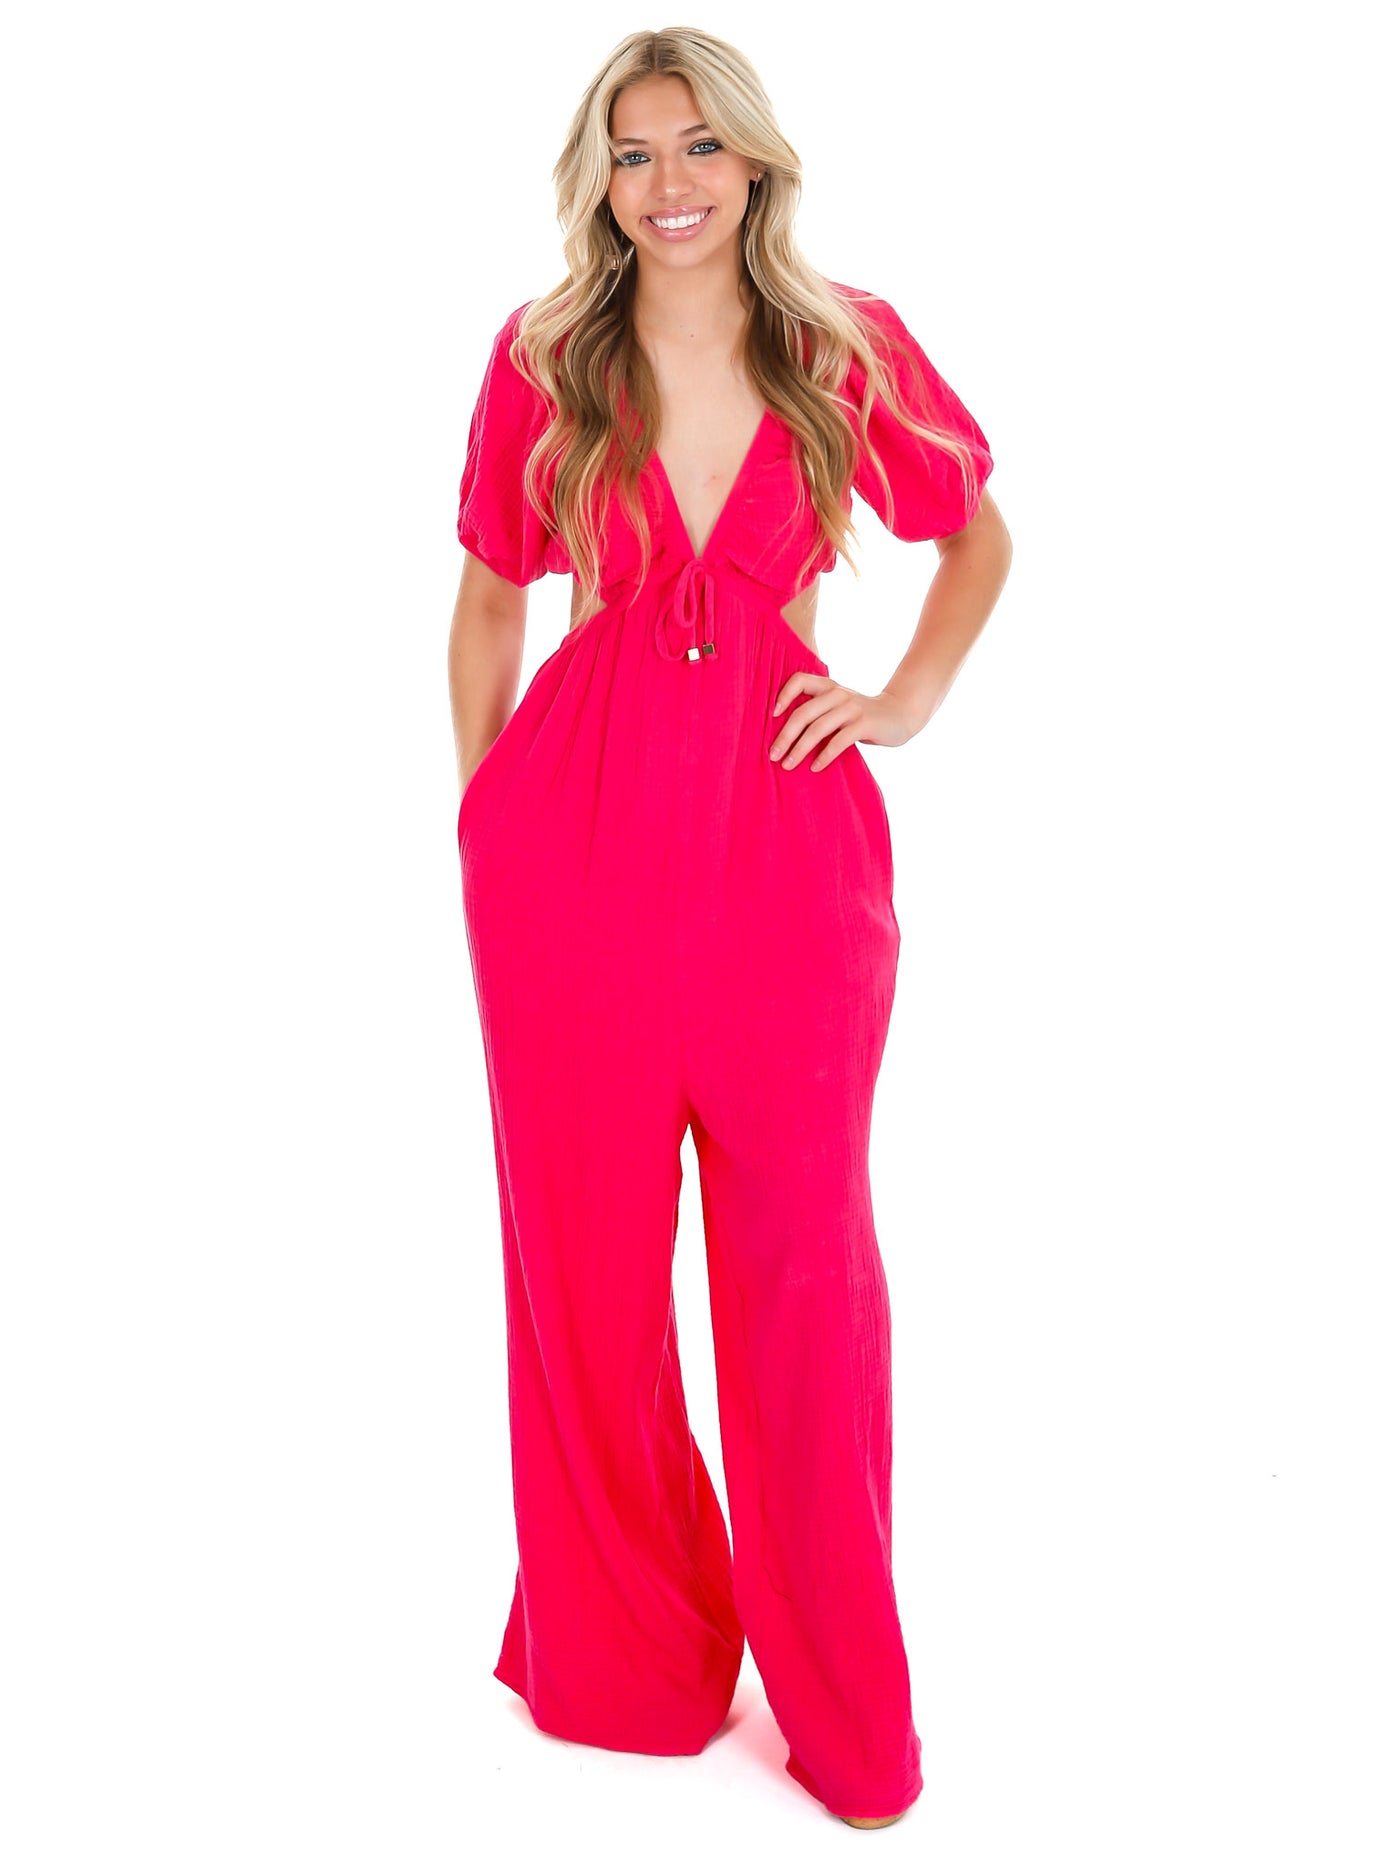 Take Your Chance Cut Out Jumpsuit